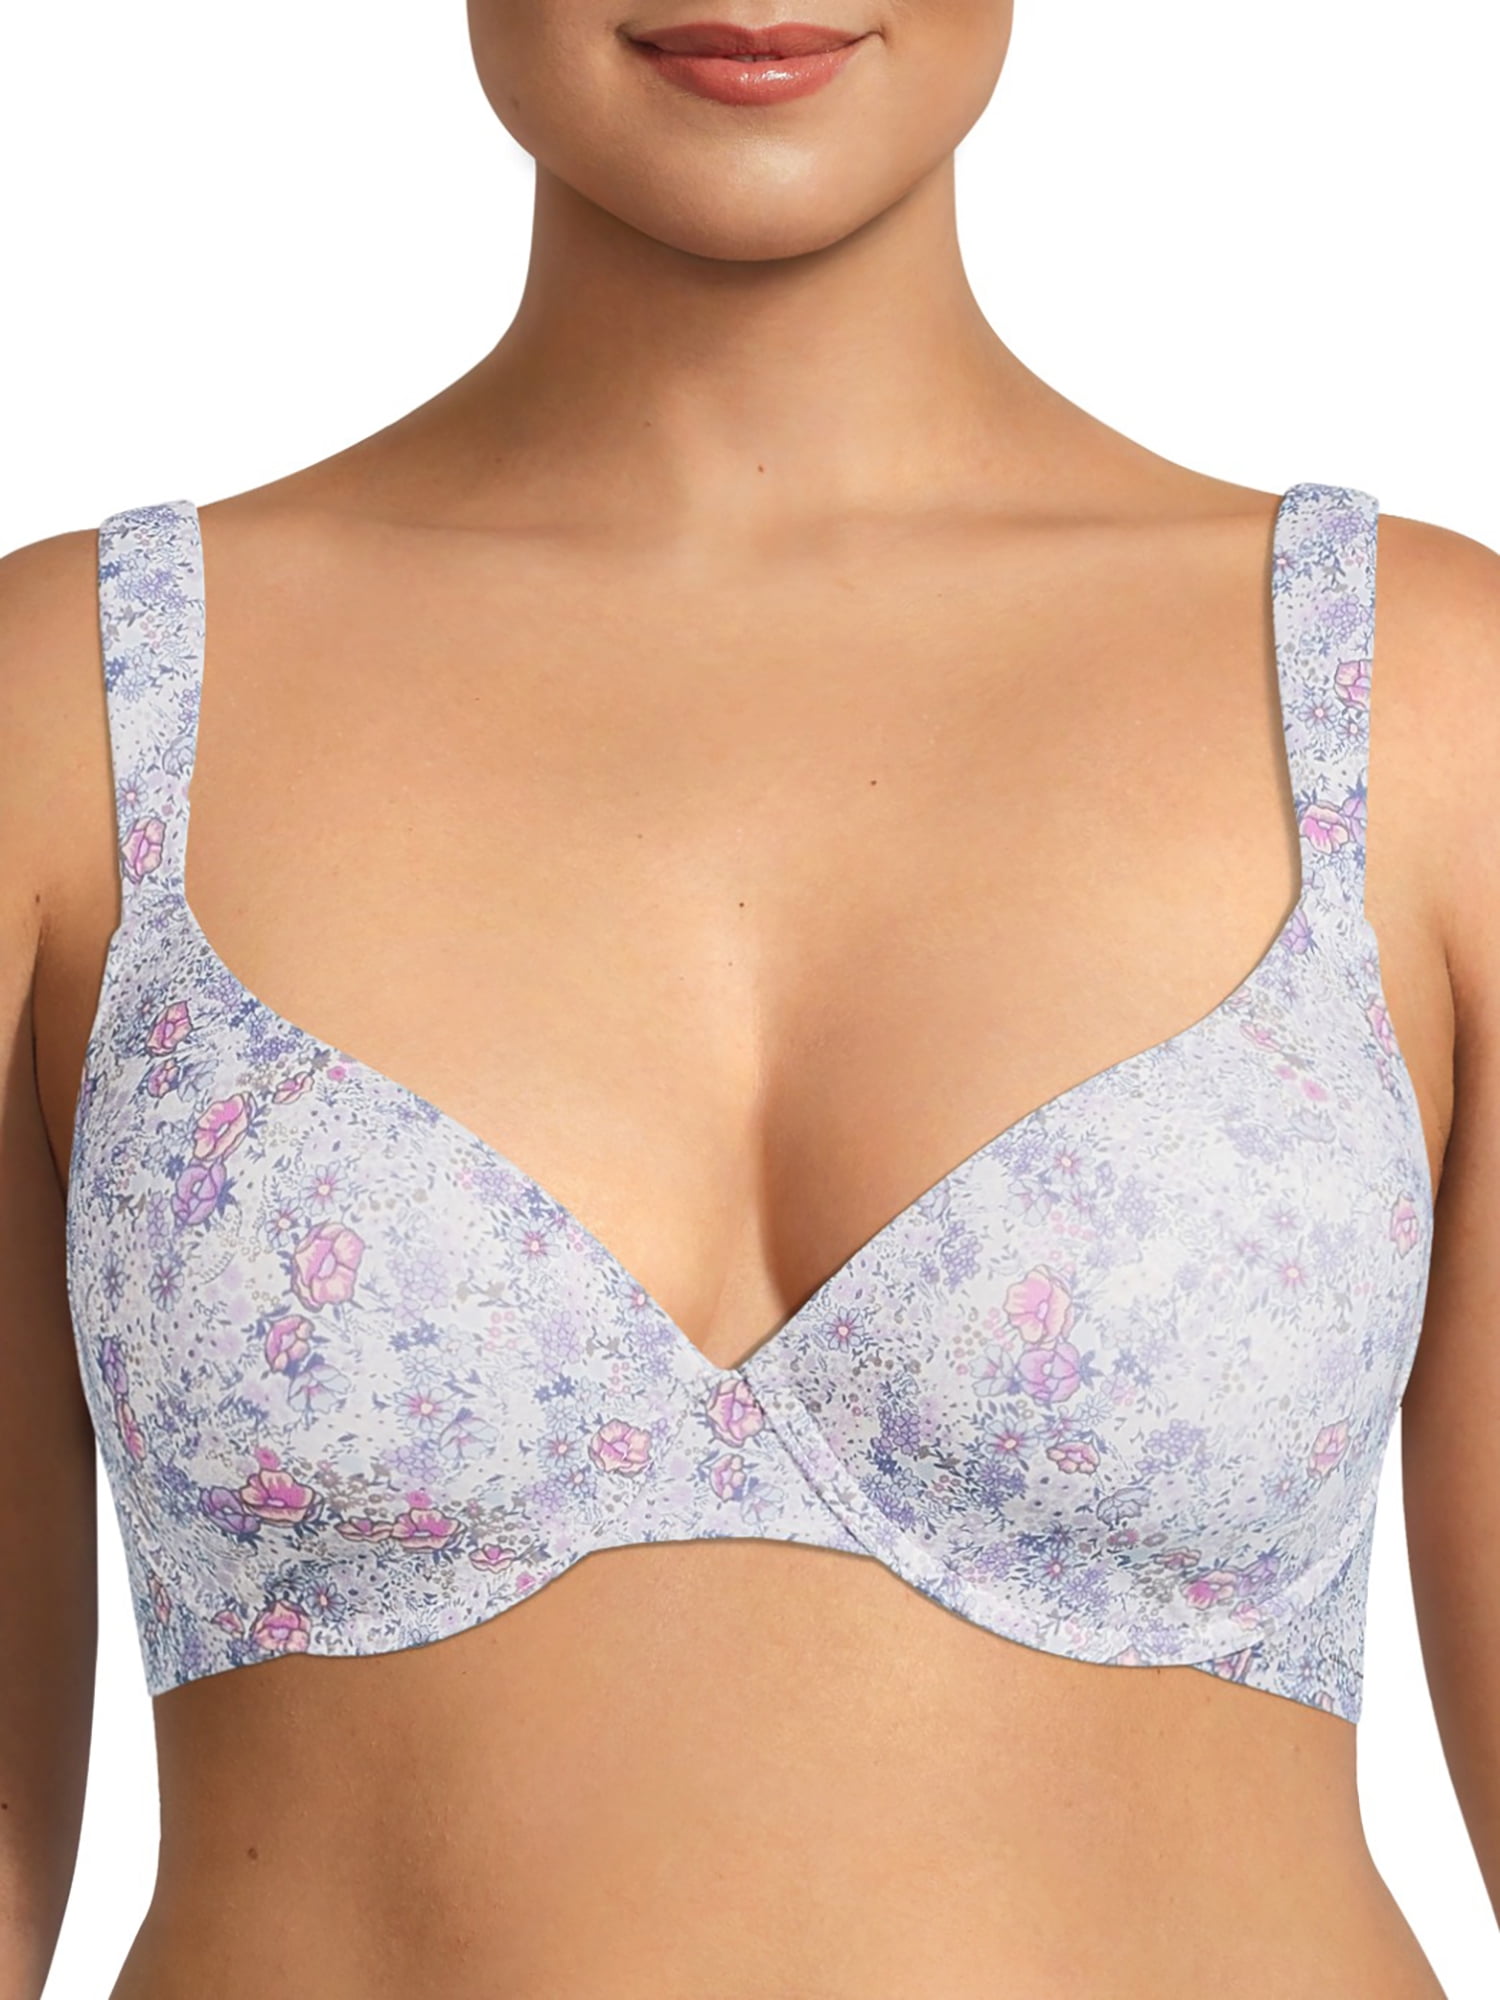 Jessica Simpson Womenâ€™s Brushed Micro Laser Lounge Bralette 2 Pack